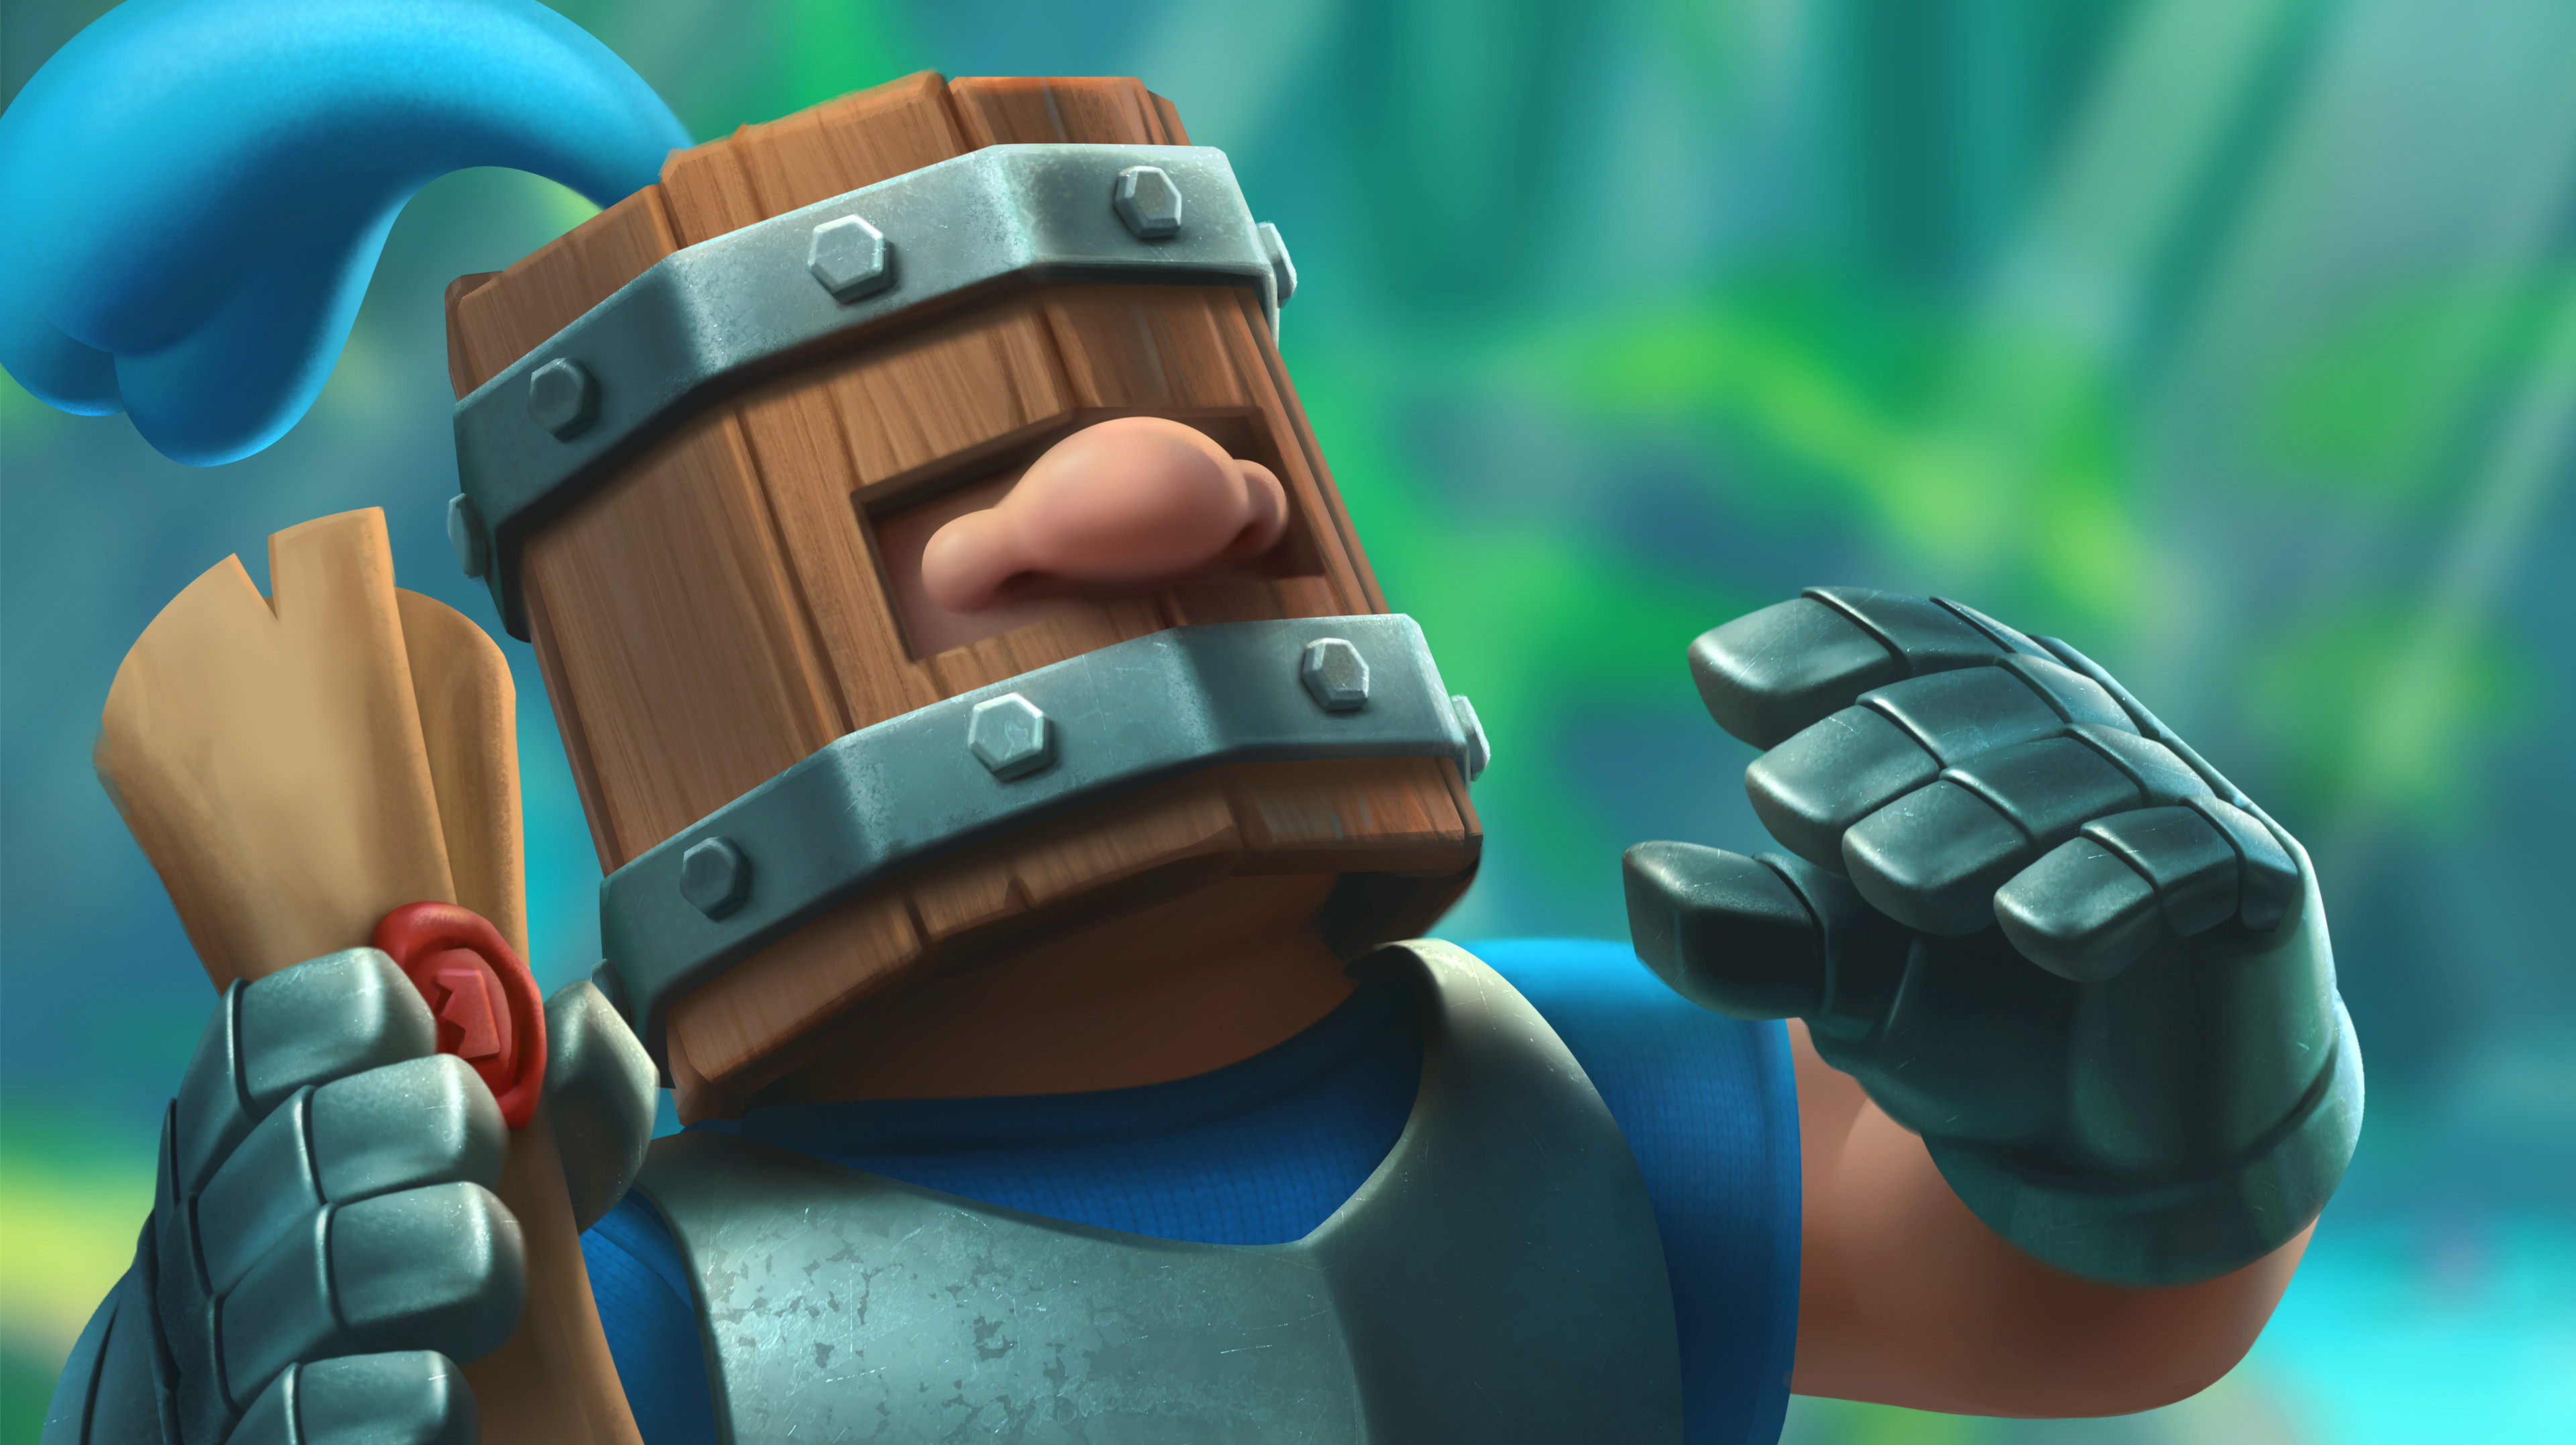 90+ Clash Royale HD Wallpapers and Backgrounds